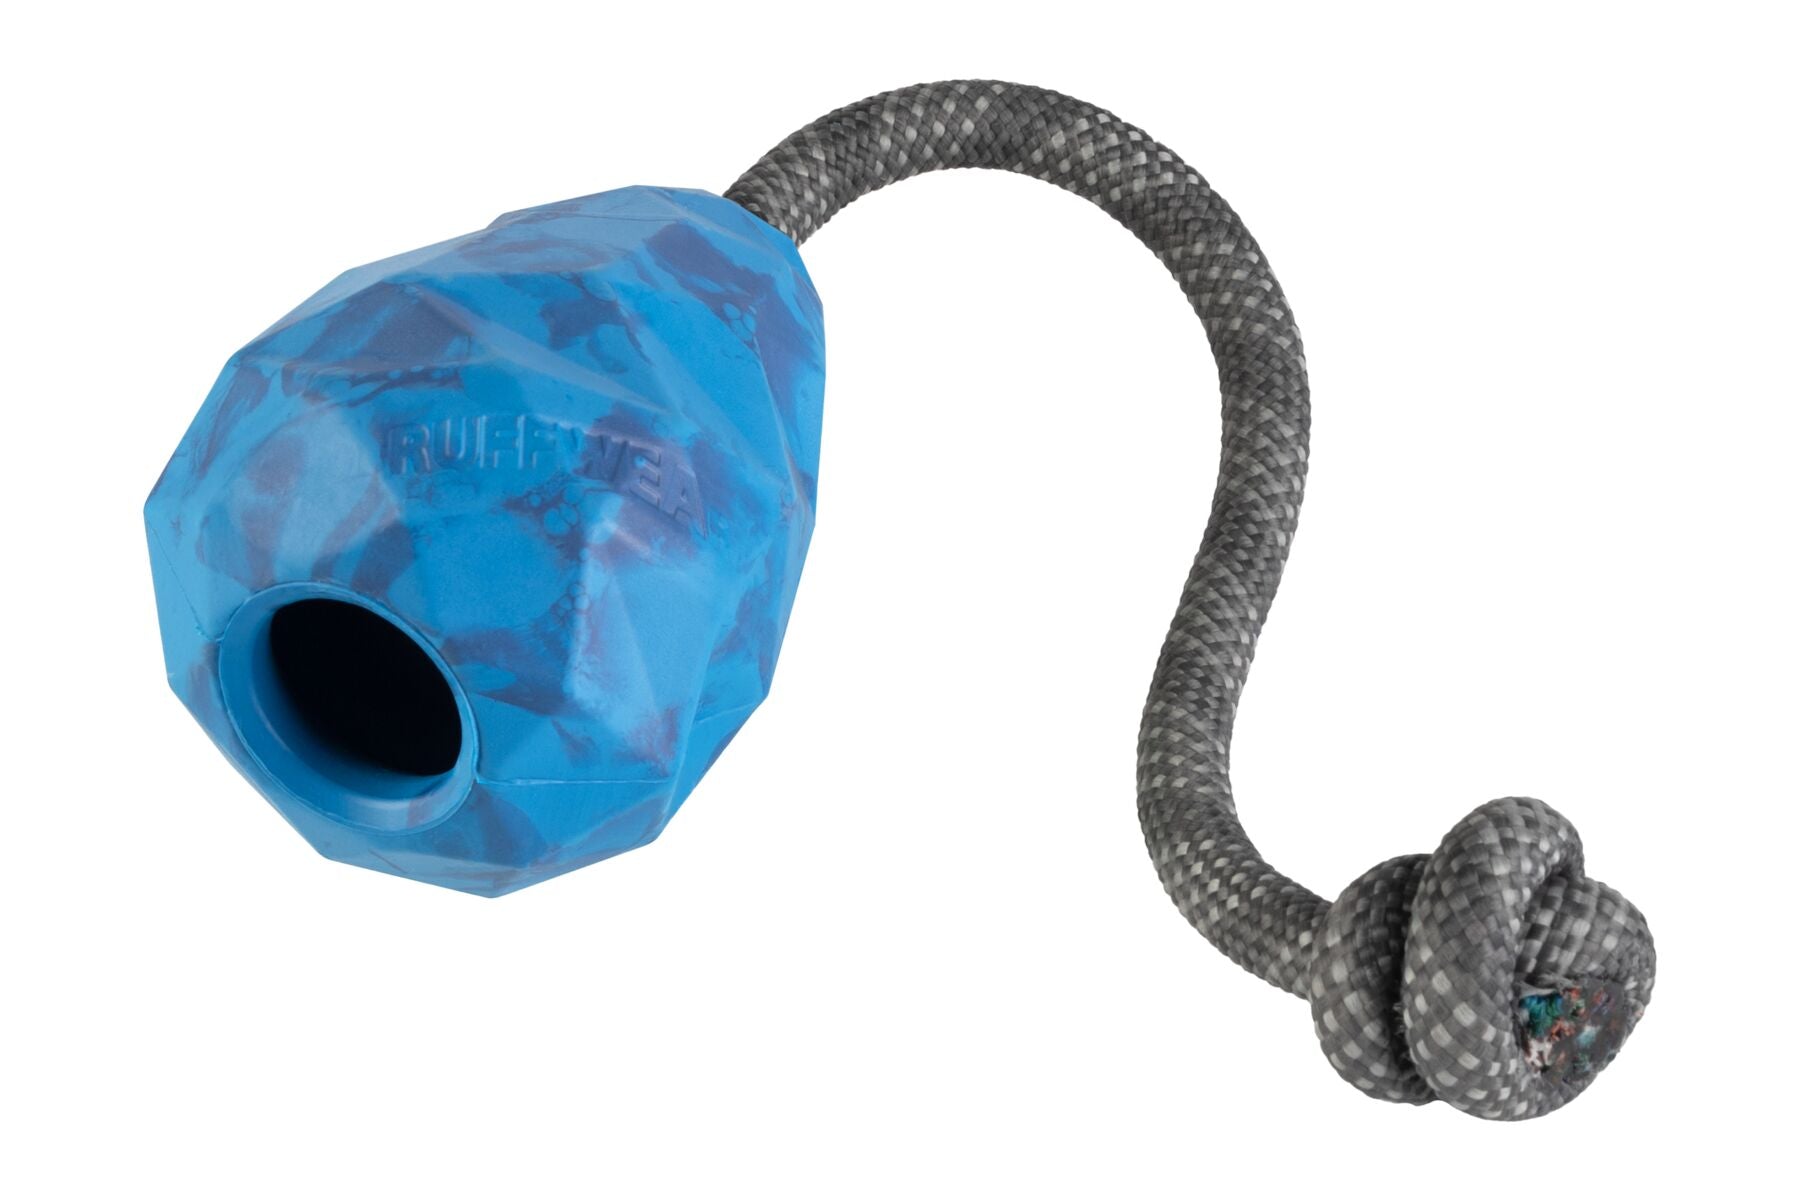 A Ruffwear Huck-a-Cone™ toy in Blue Pool color. 